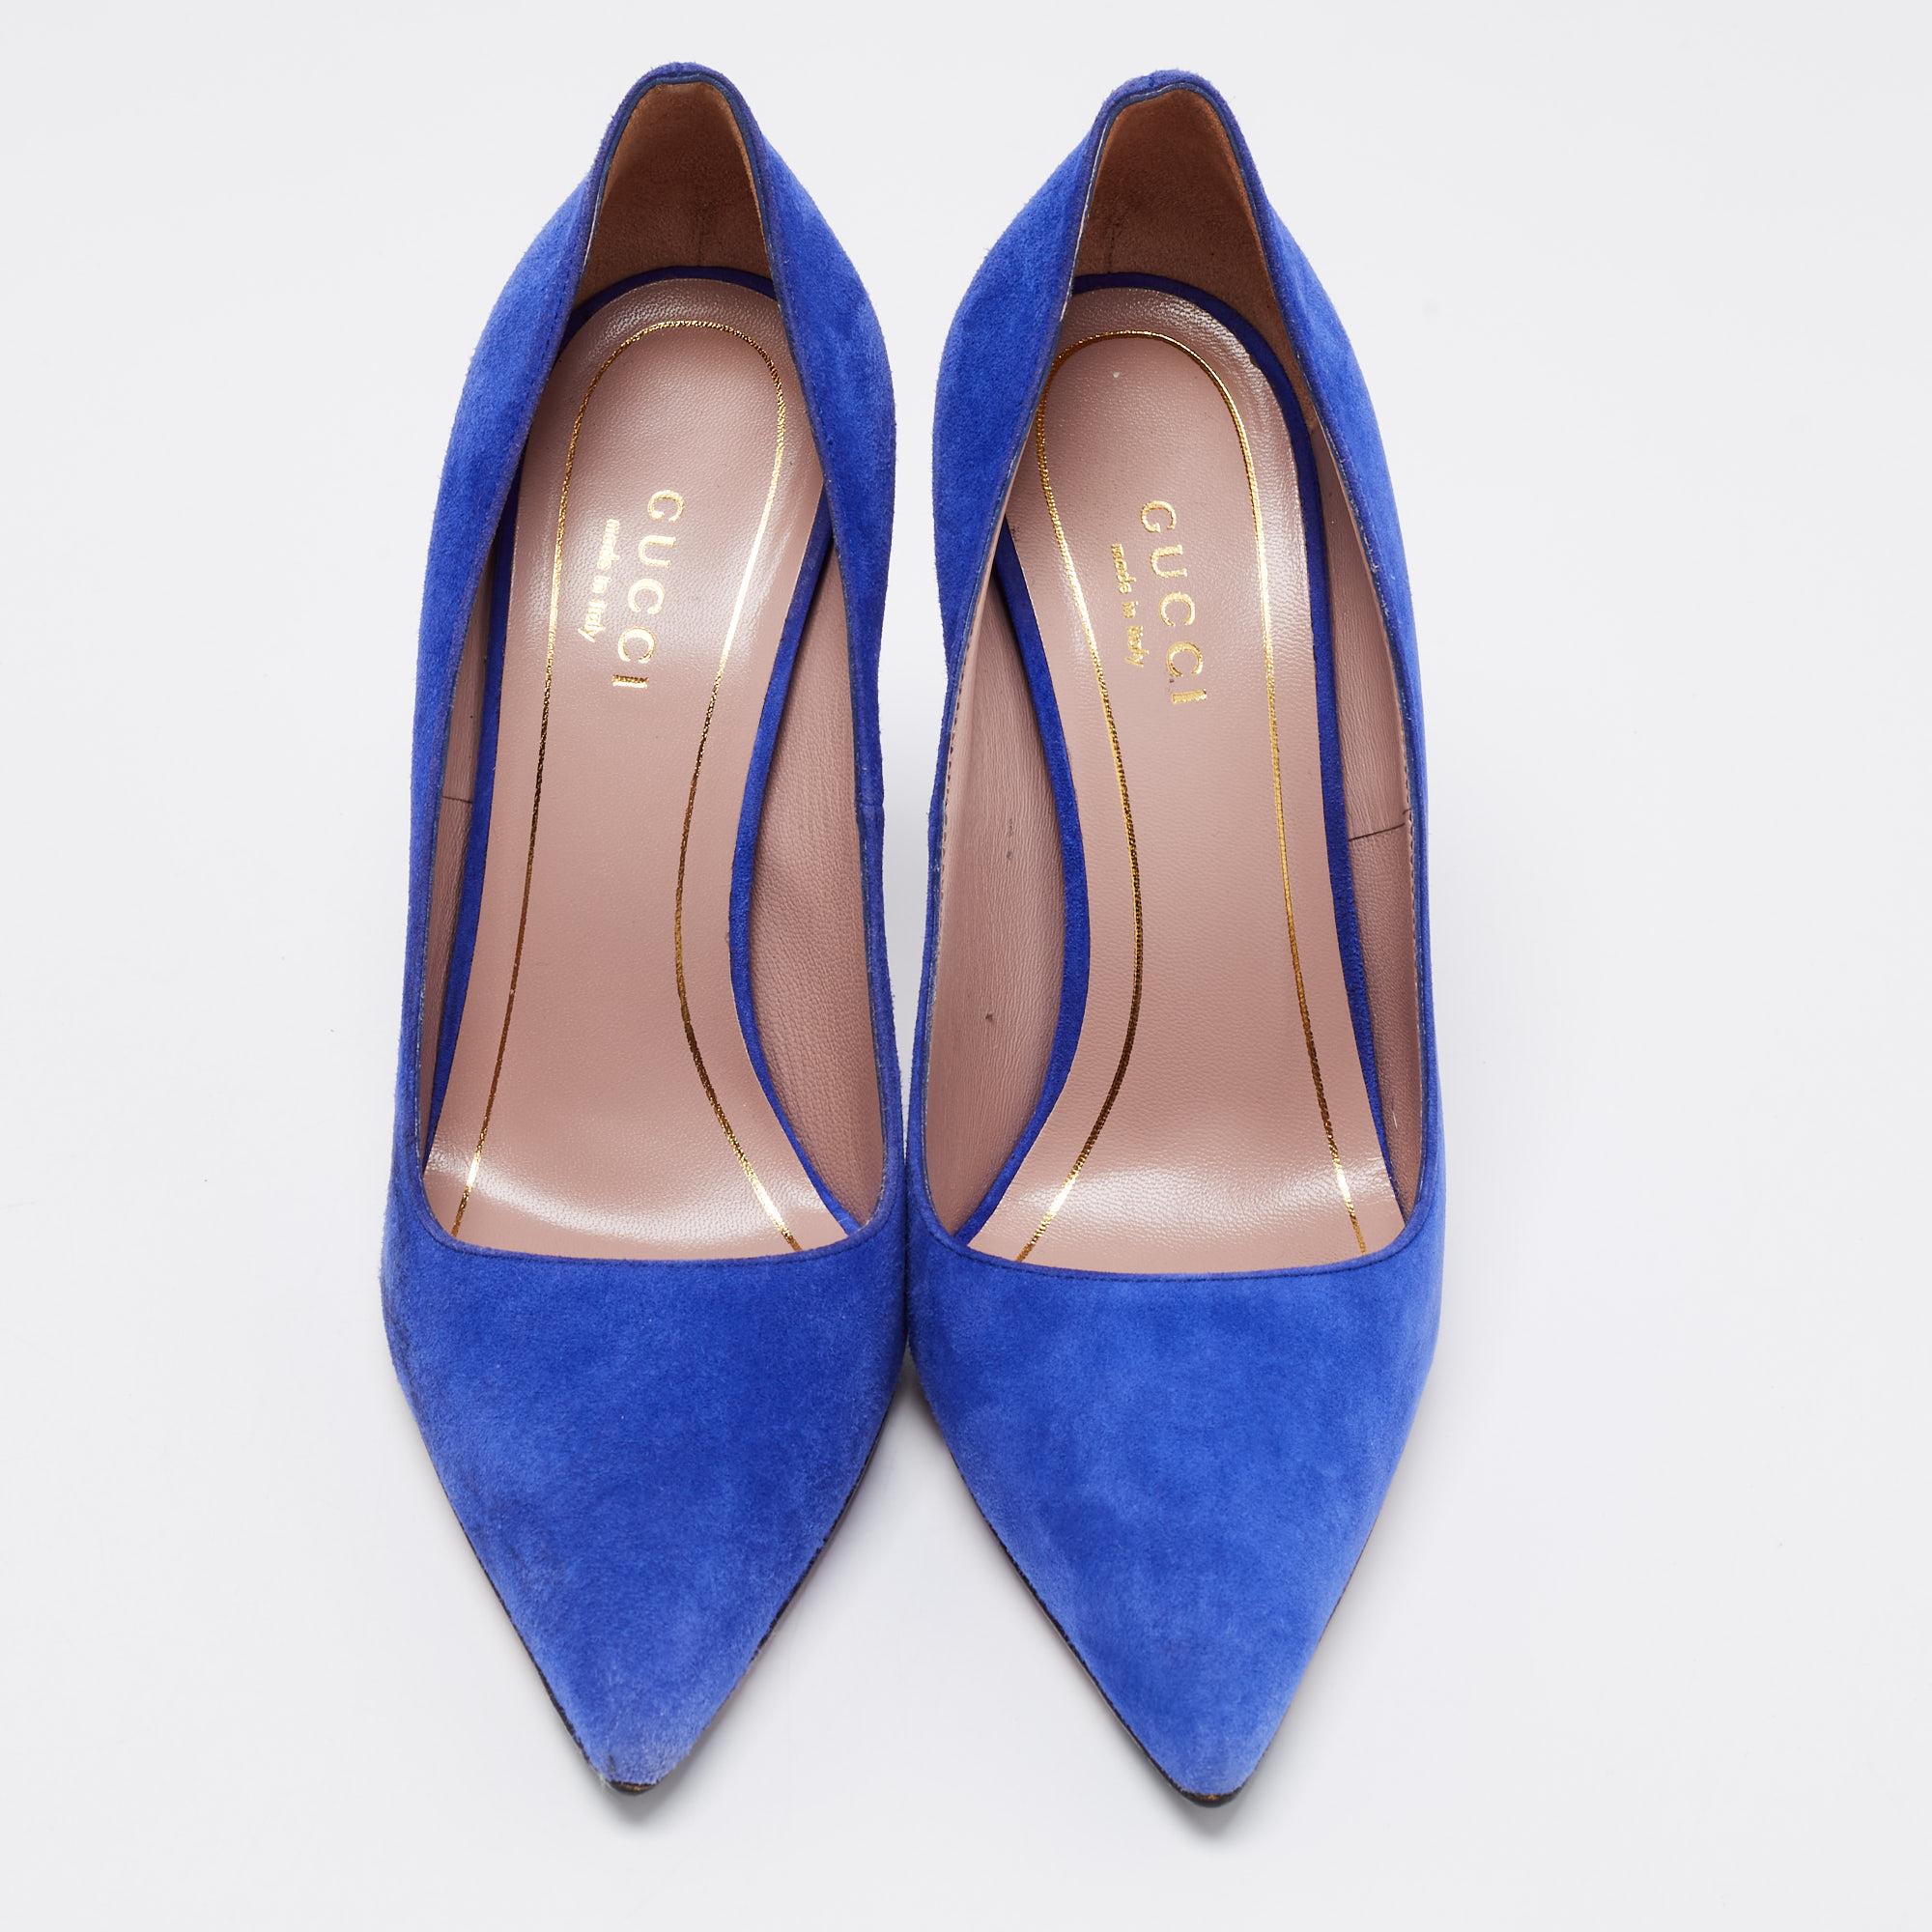 Take every step with elegance and style in these gorgeous pumps from the House of Gucci. They are crafted meticulously using blue suede. They showcase pointed toes, slender heels, and a slip-on feature. These beautiful Gucci pumps will be your